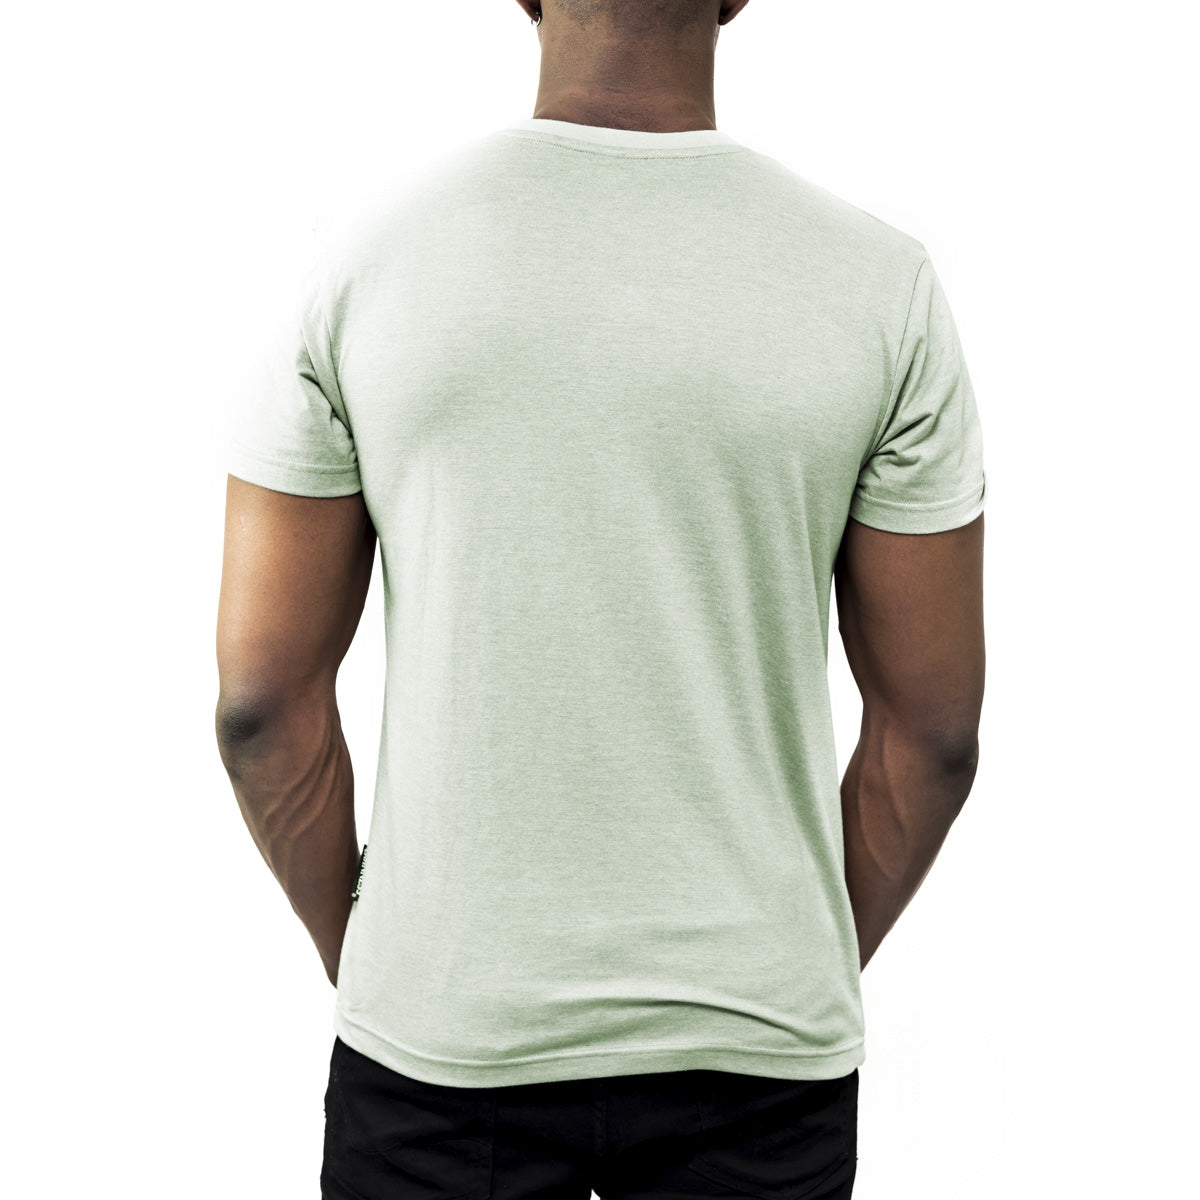 The back of a man wearing a Guinness Green Bottle Cap Tee.